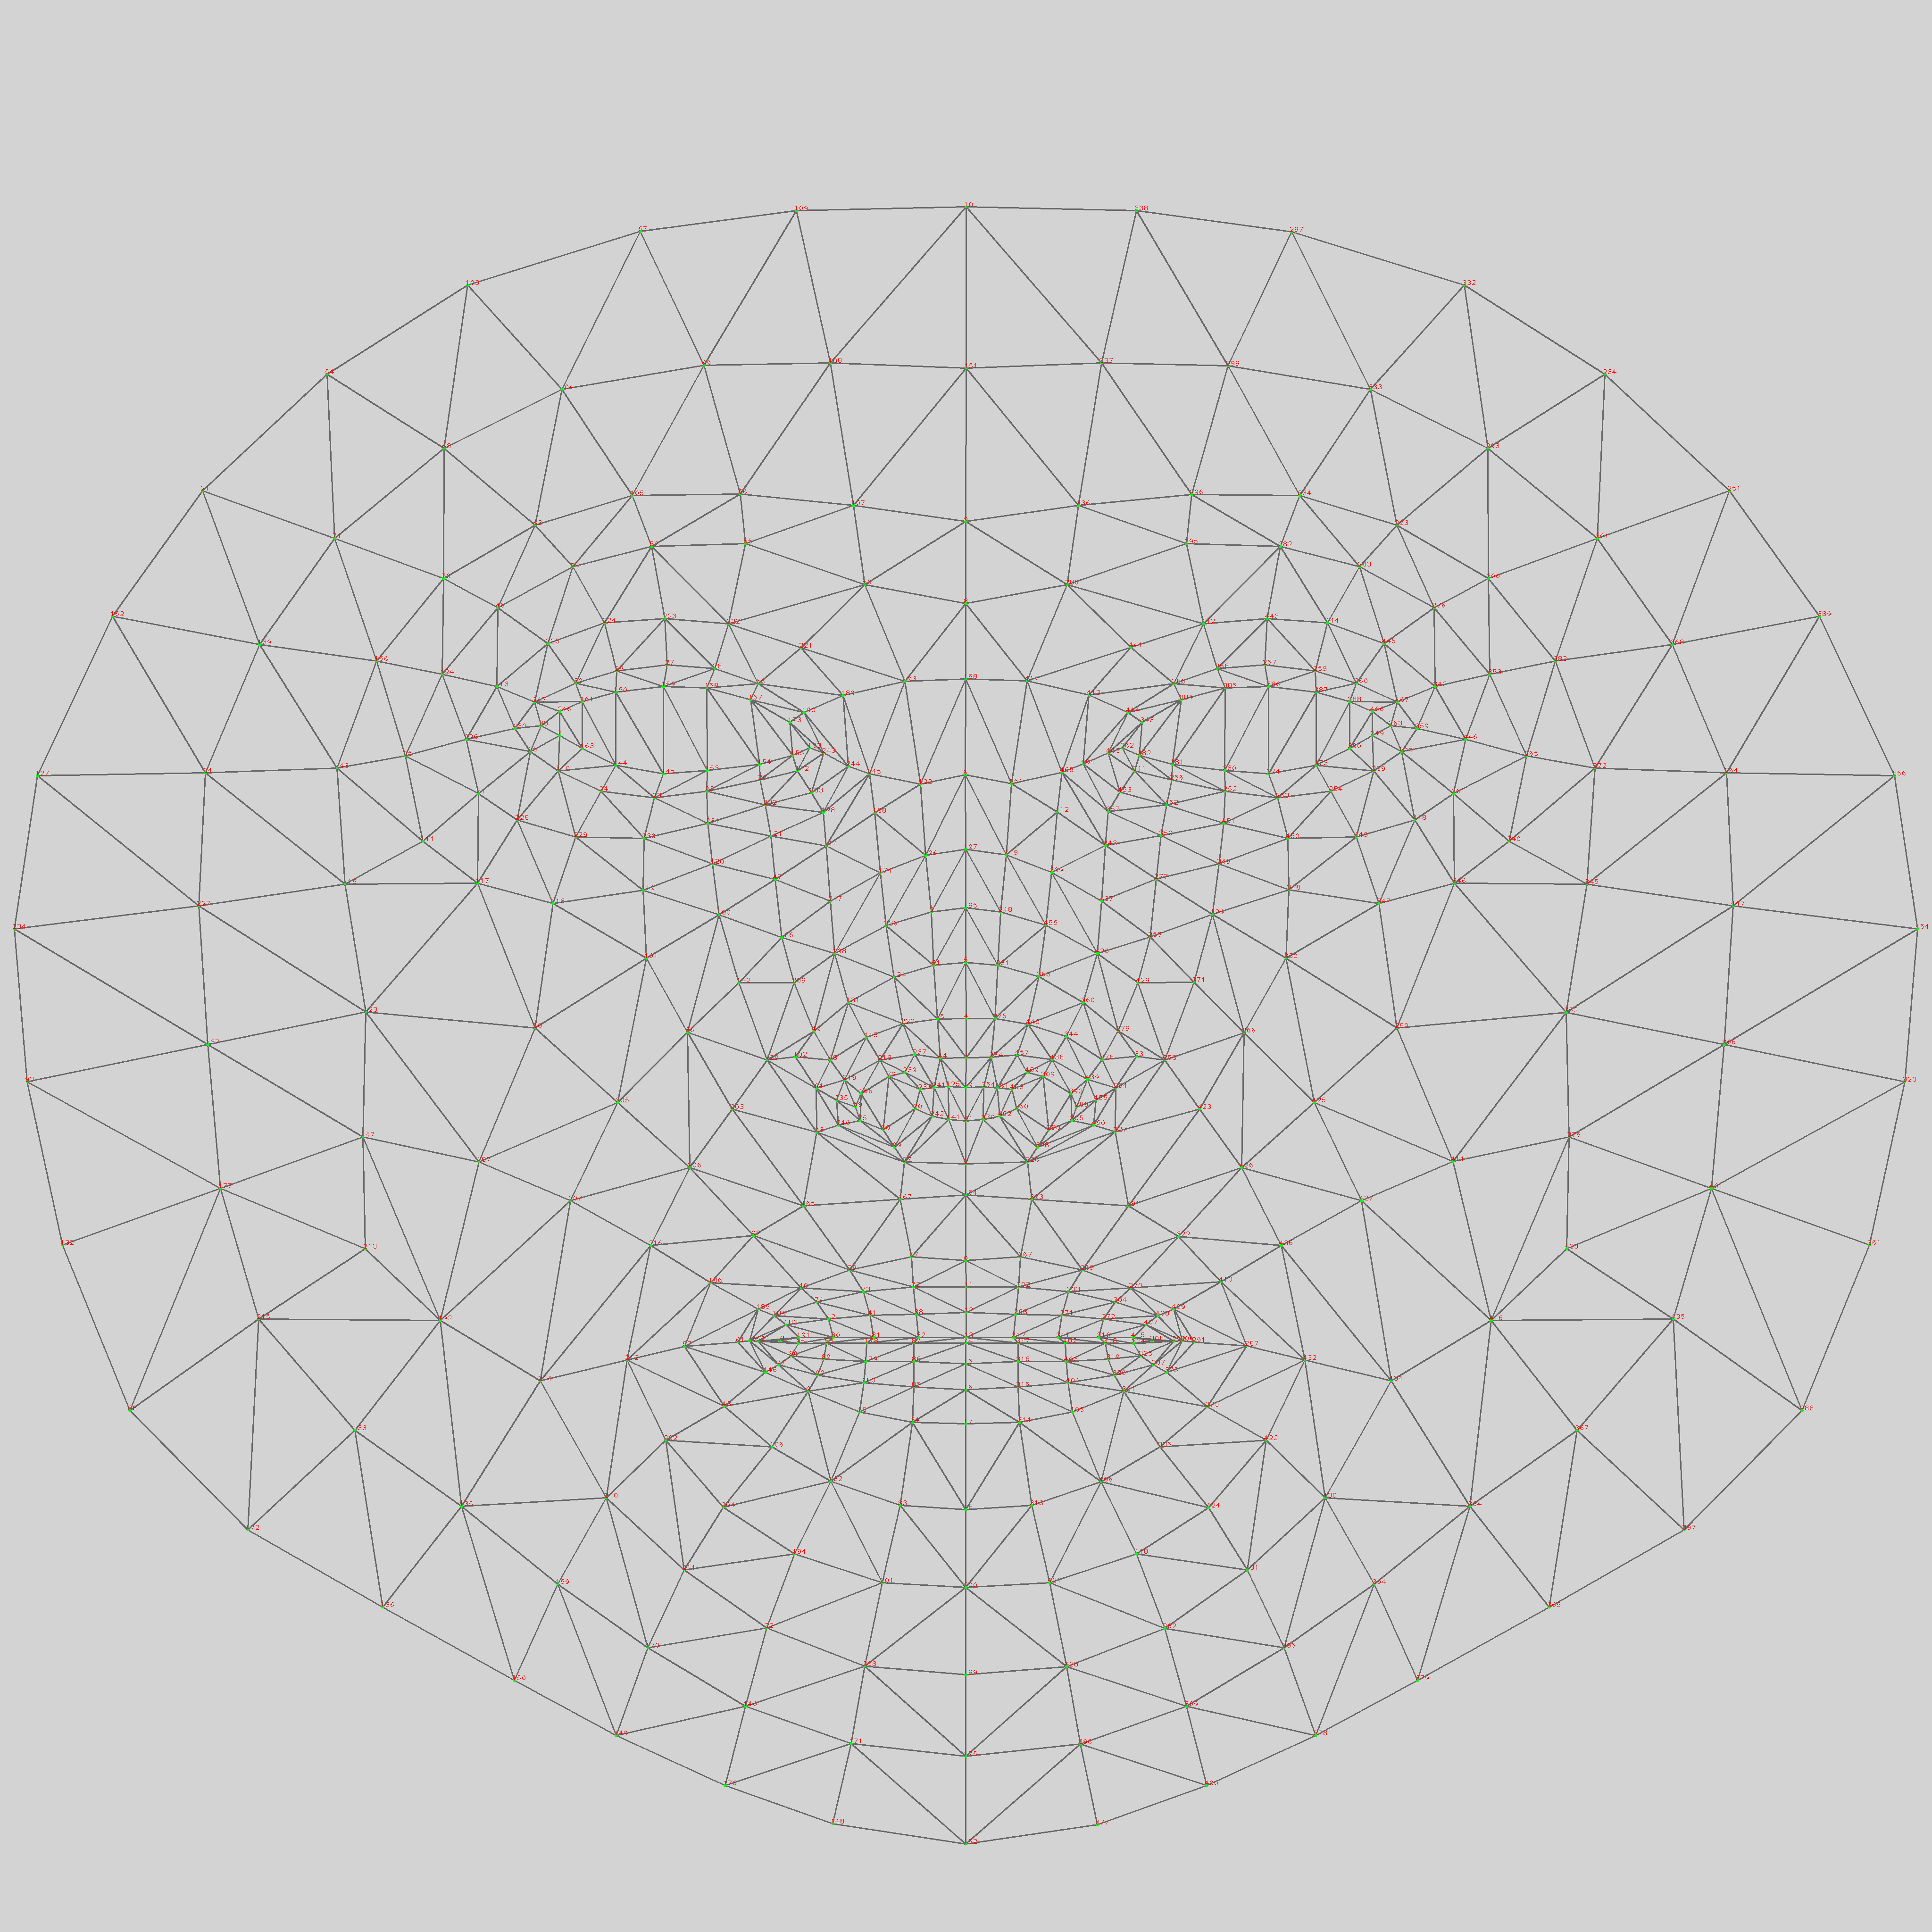 Example of face mesh info, click for zoomable image